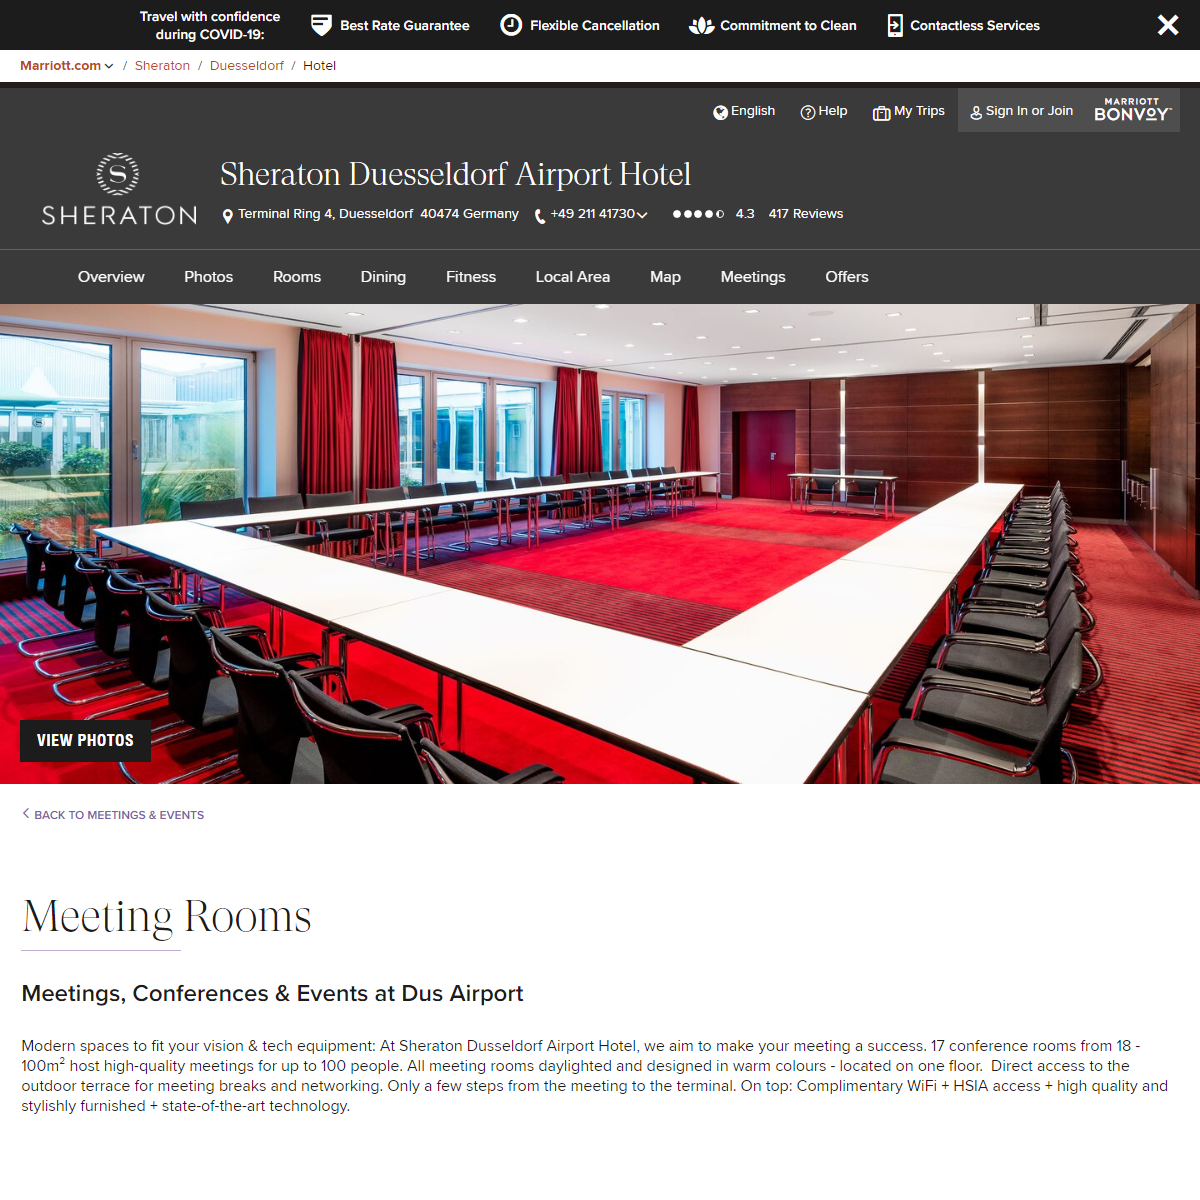 A complete backup of https://www.marriott.com/hotels/event-planning/business-meeting/details-1/dusso-sheraton-duesseldorf-airpor